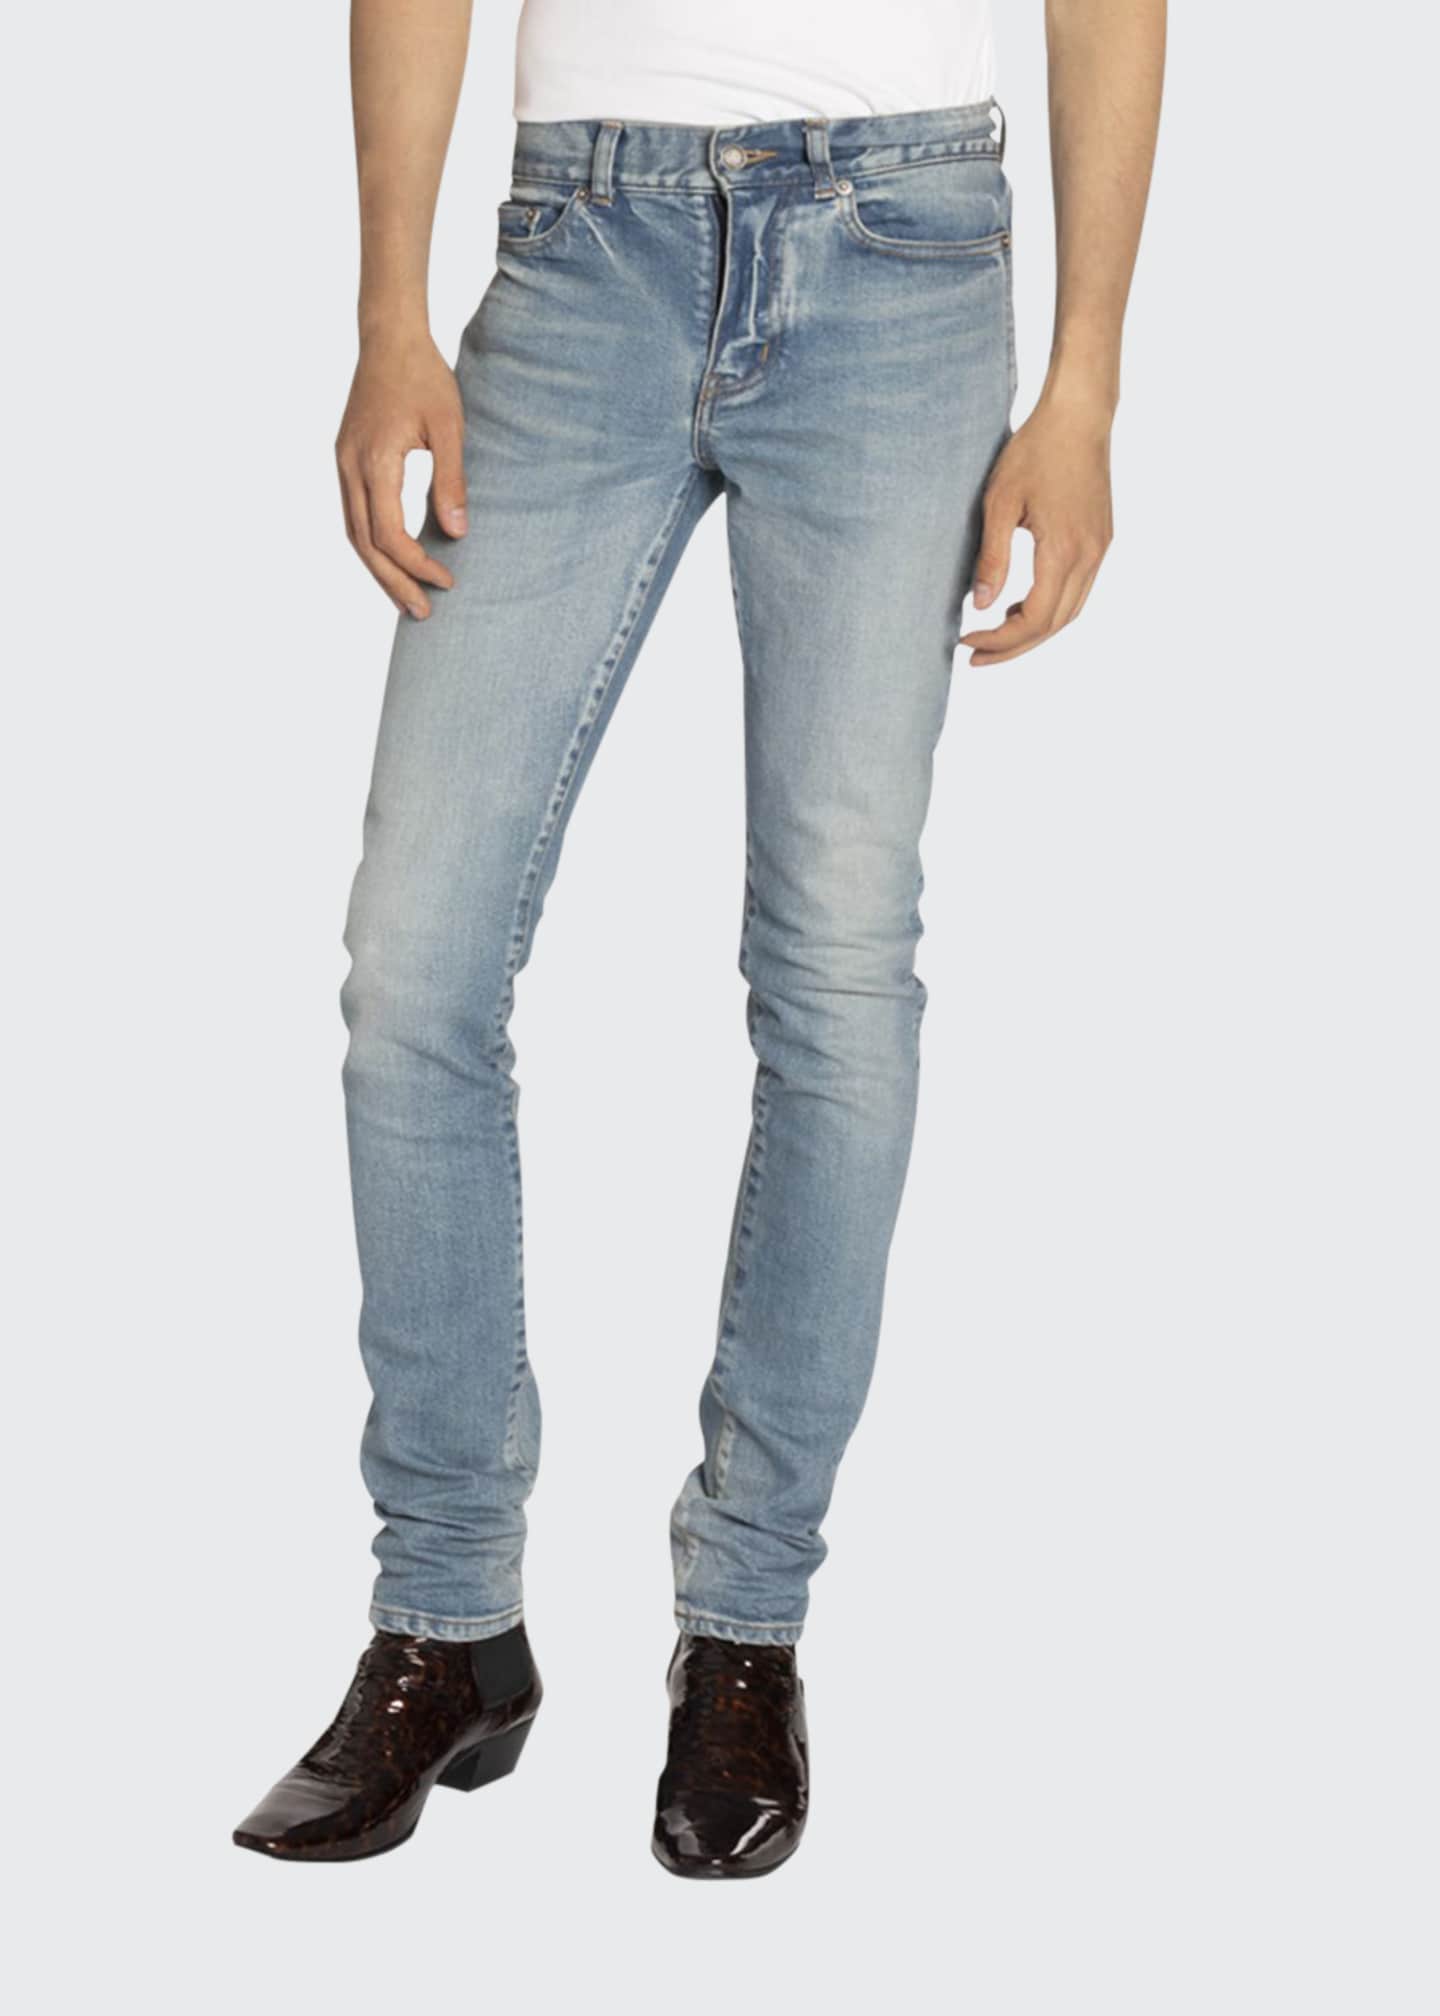 mens low rise stretch jeans